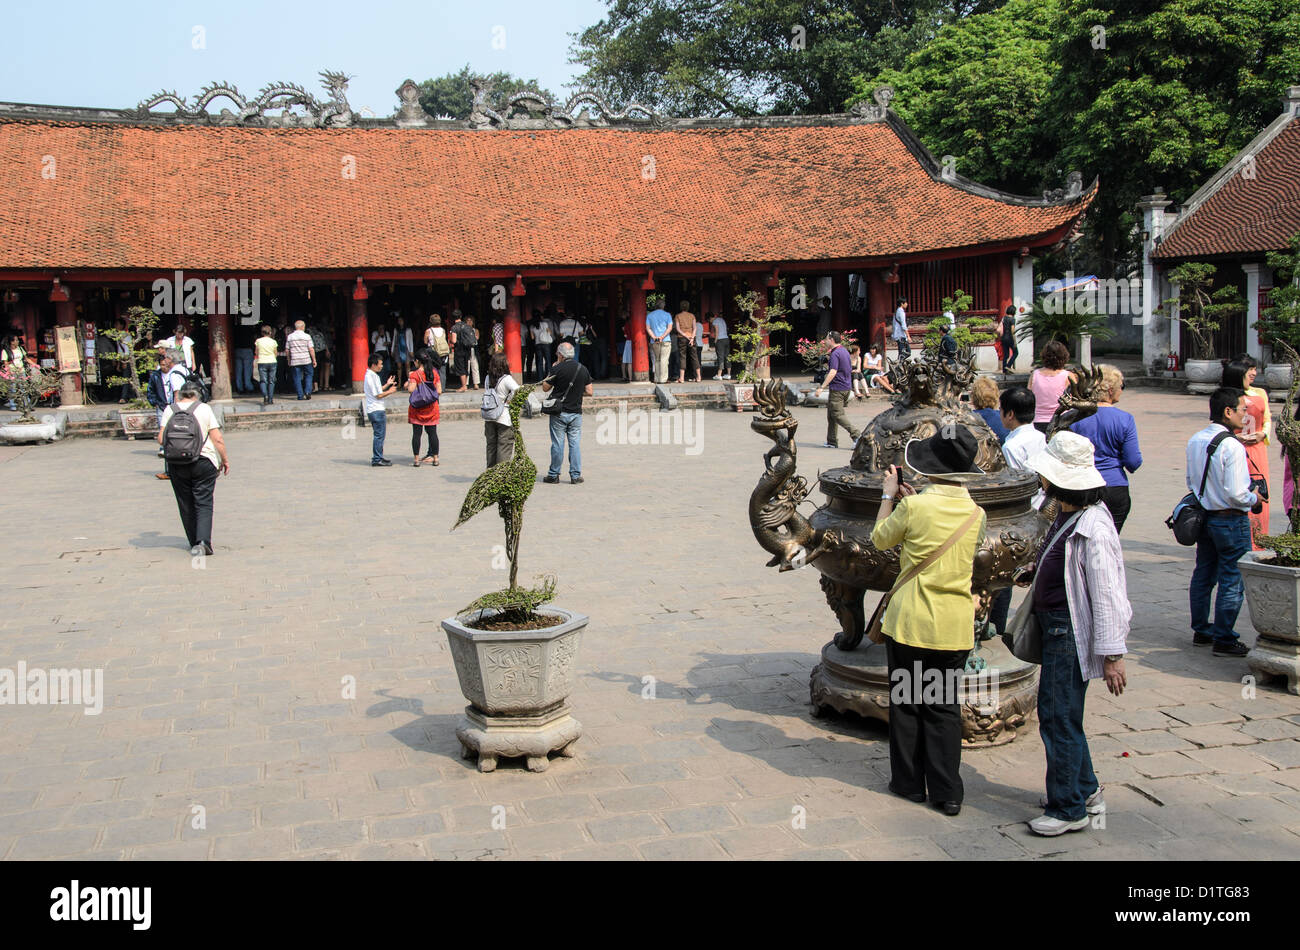 HANOI, Vietnam - Tourists in one of the courtyards of the Temple of Literature in Hanoi. The temple was built in 1070 and is one of several temples in Vietnam which are dedicated to Confucius, sages and scholars. Stock Photo